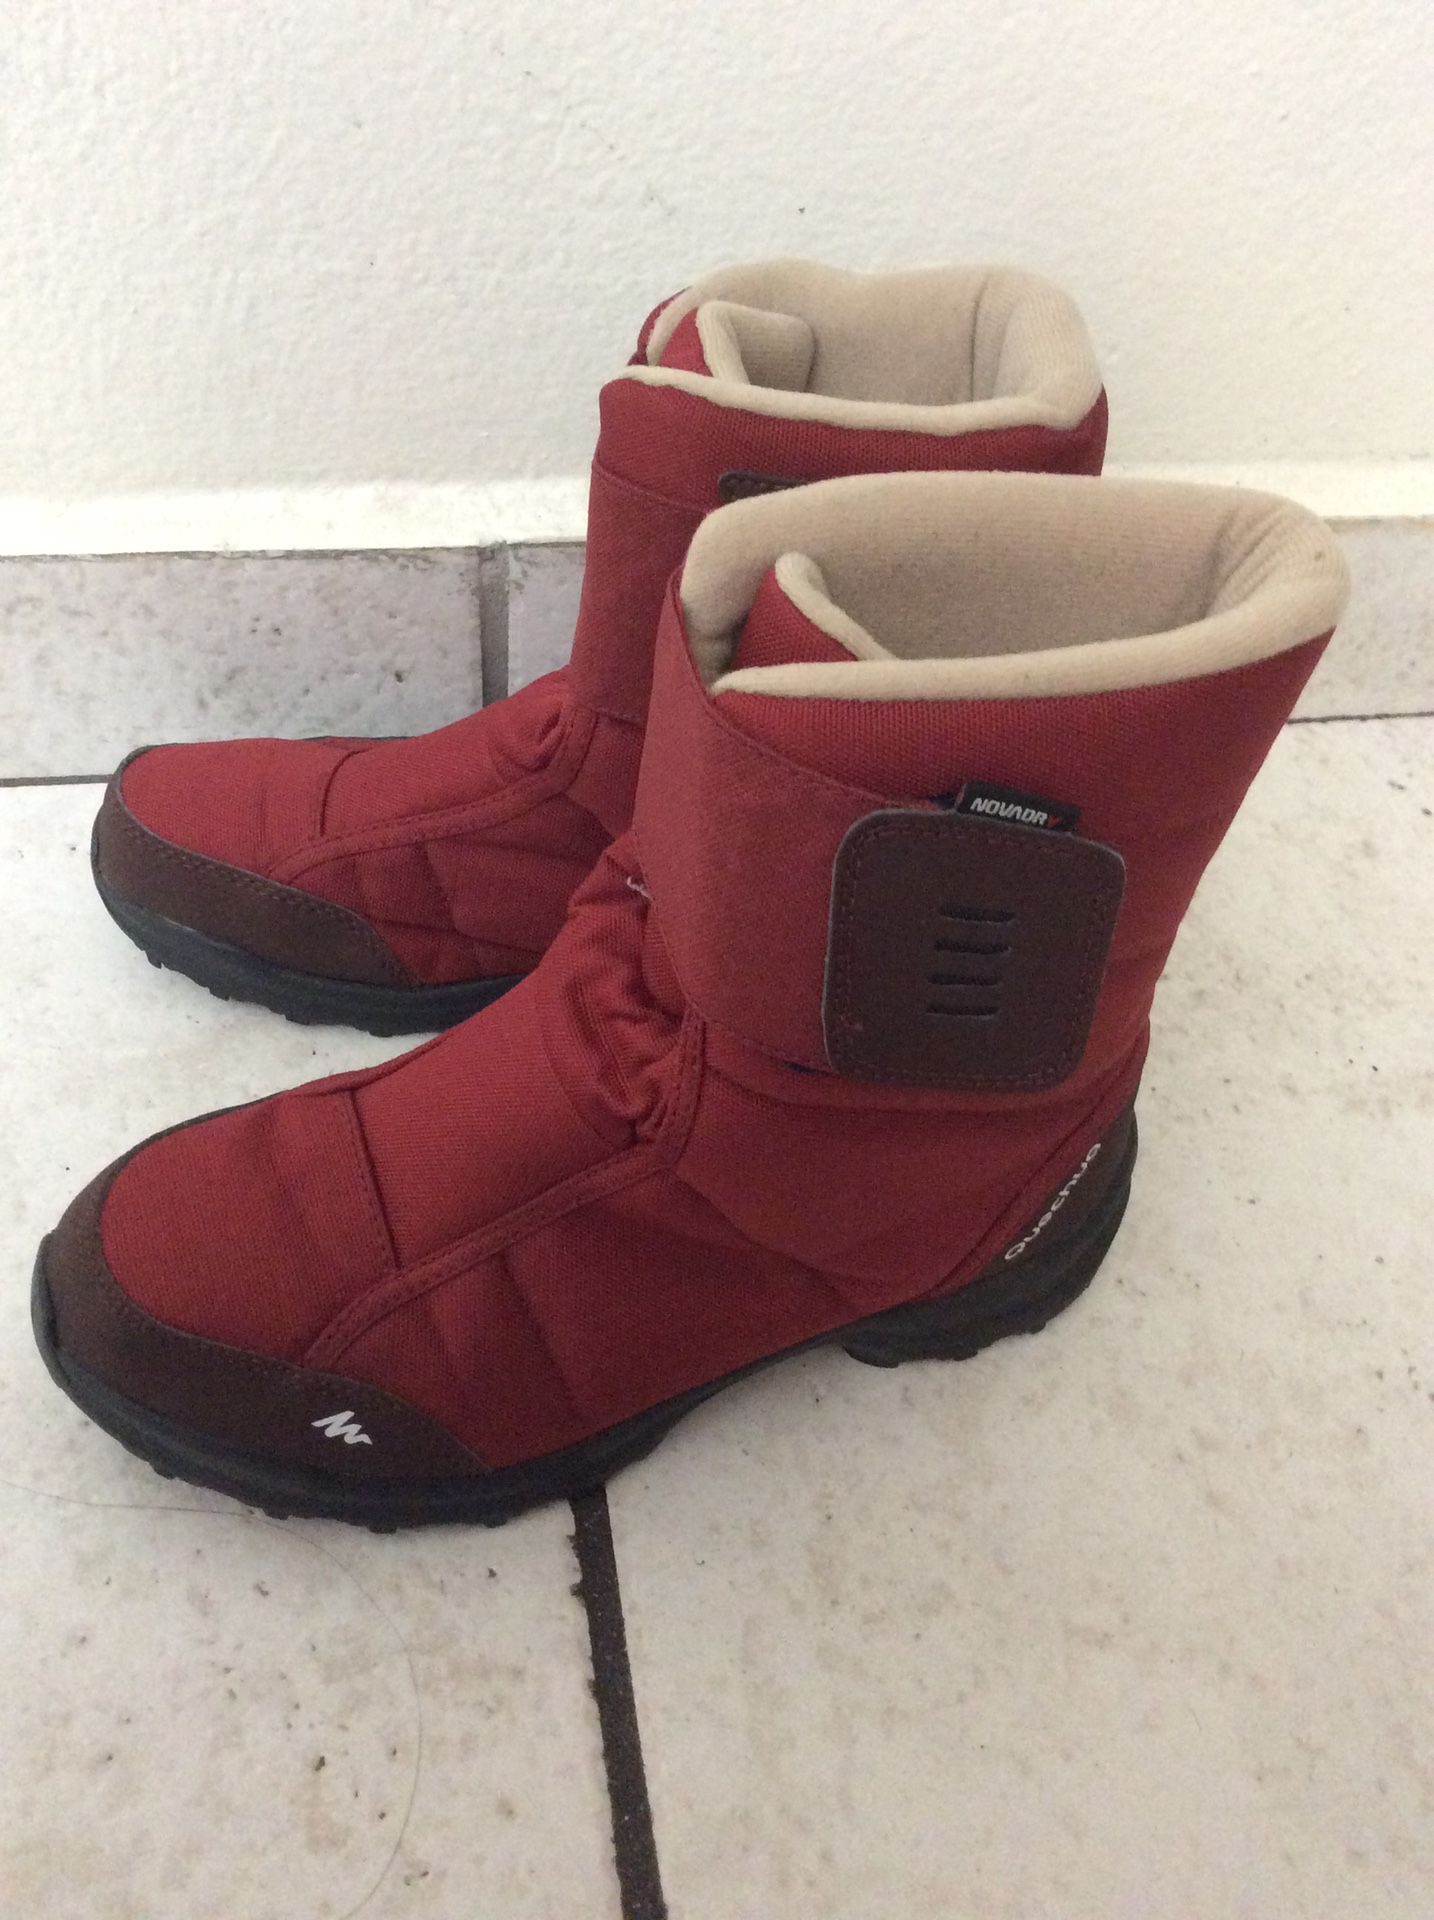 Snow boots size 5.5